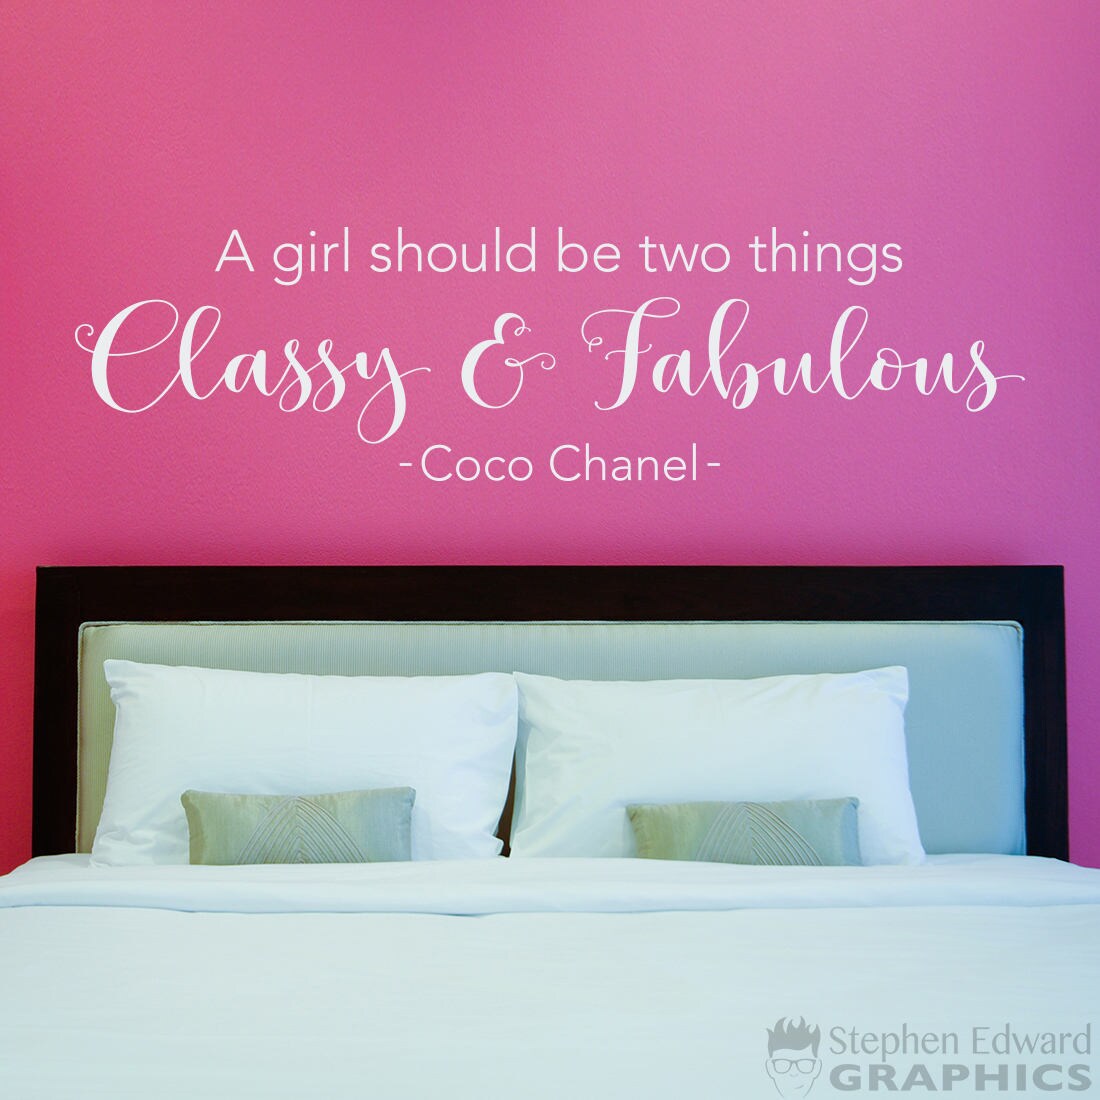 Coco Chanel Quote Decal - A girl should be two things Classy & Fabulous - Girl Decor